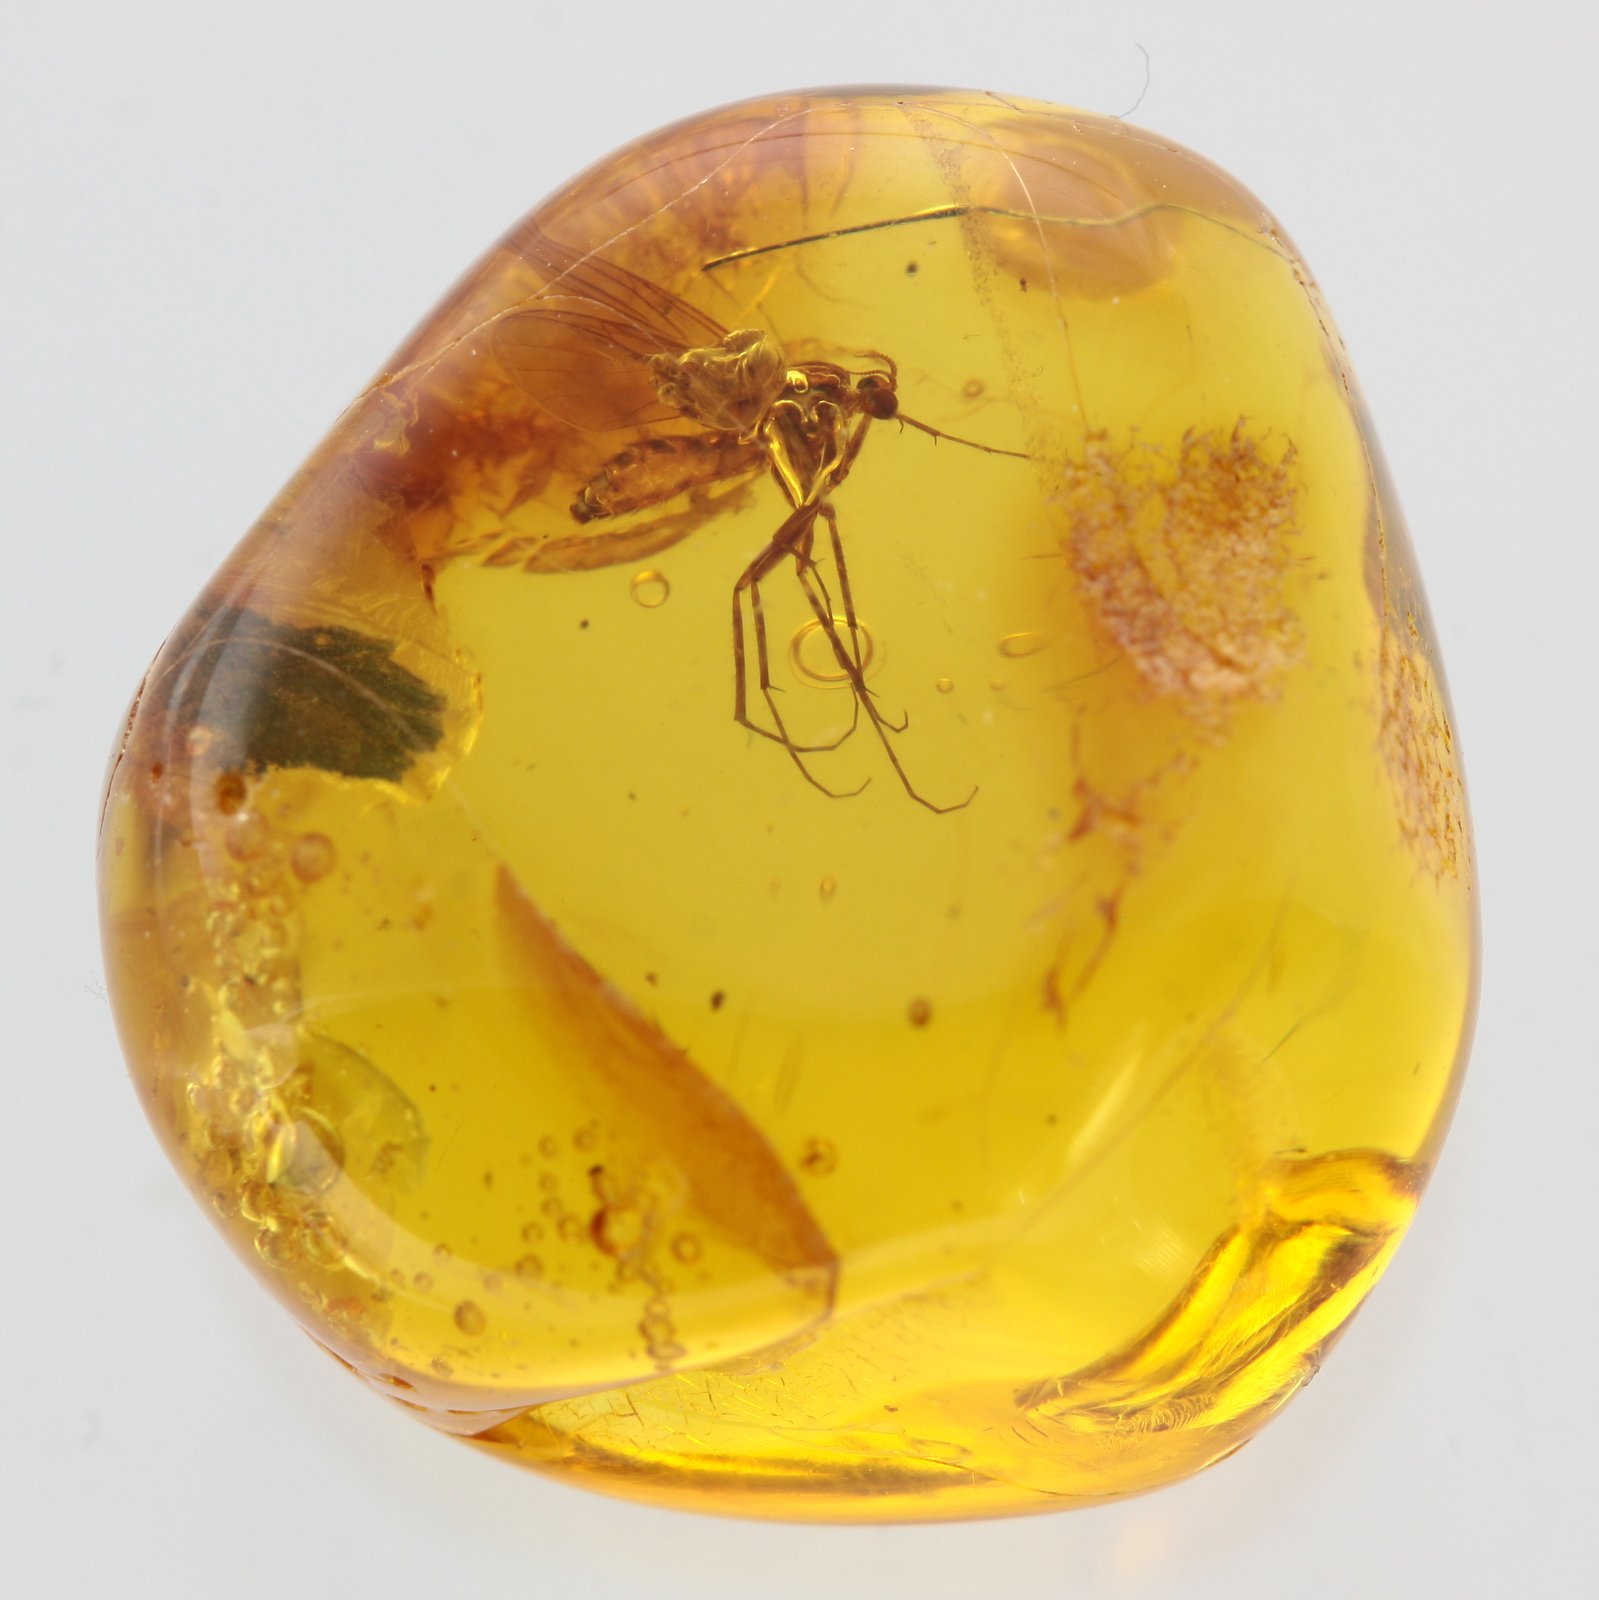 Amber Piece NATURAL BALTIC AMBER Piece with Insect Inclusion Fossil Insects Gift 10,6g 13843